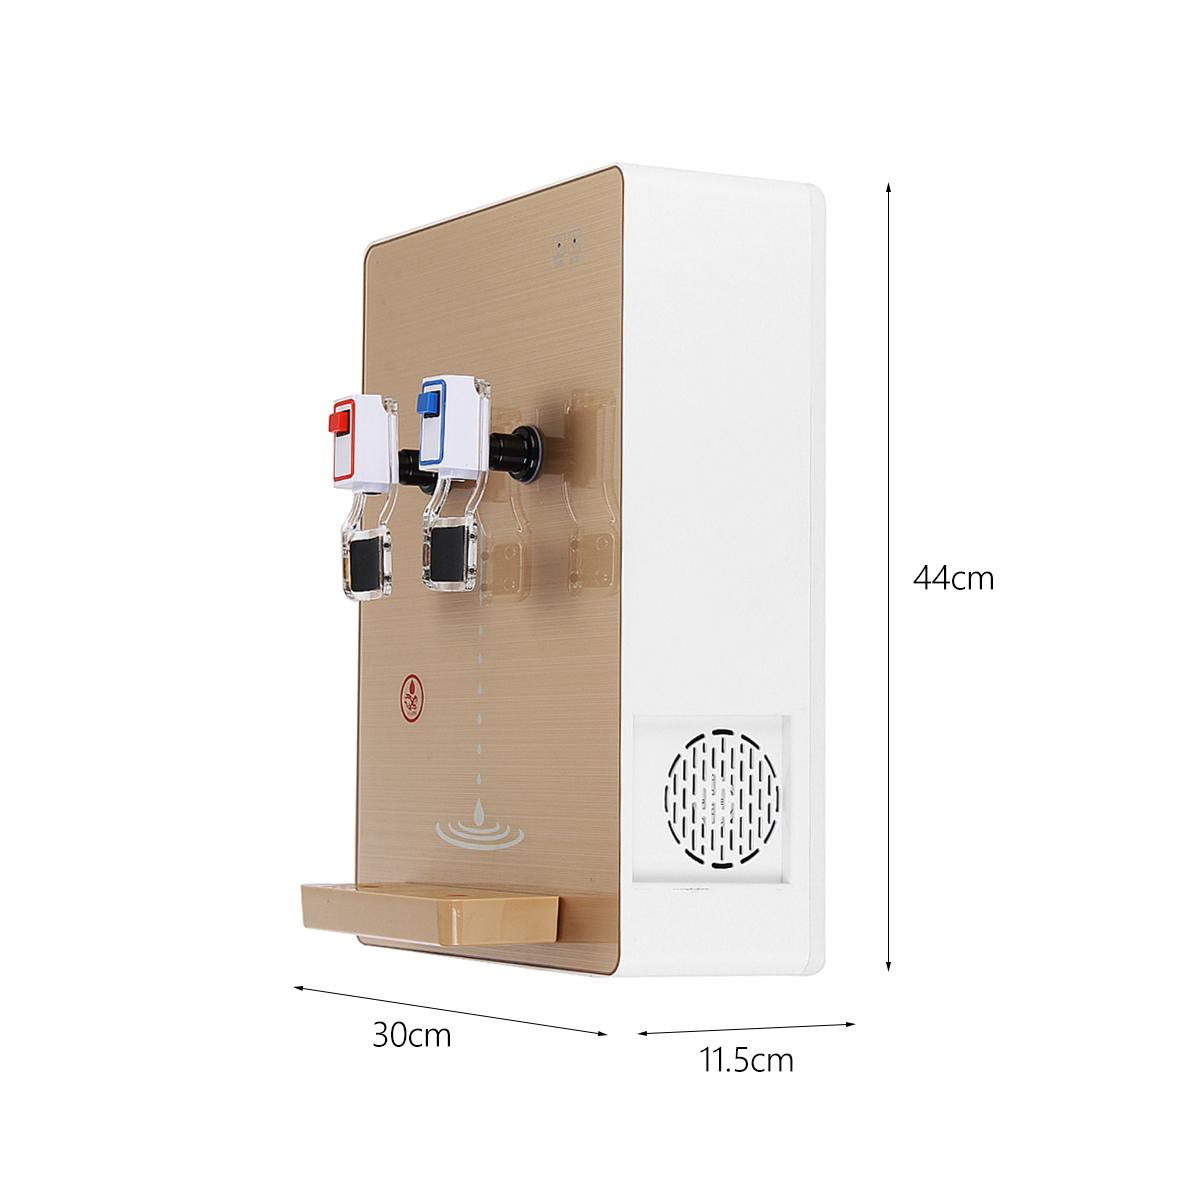 Wall-mounted Water Dispenser Pumping Device Hot & Cold Water Connect the Water Purifier Cooler Heater Drinking Water Pump Tools